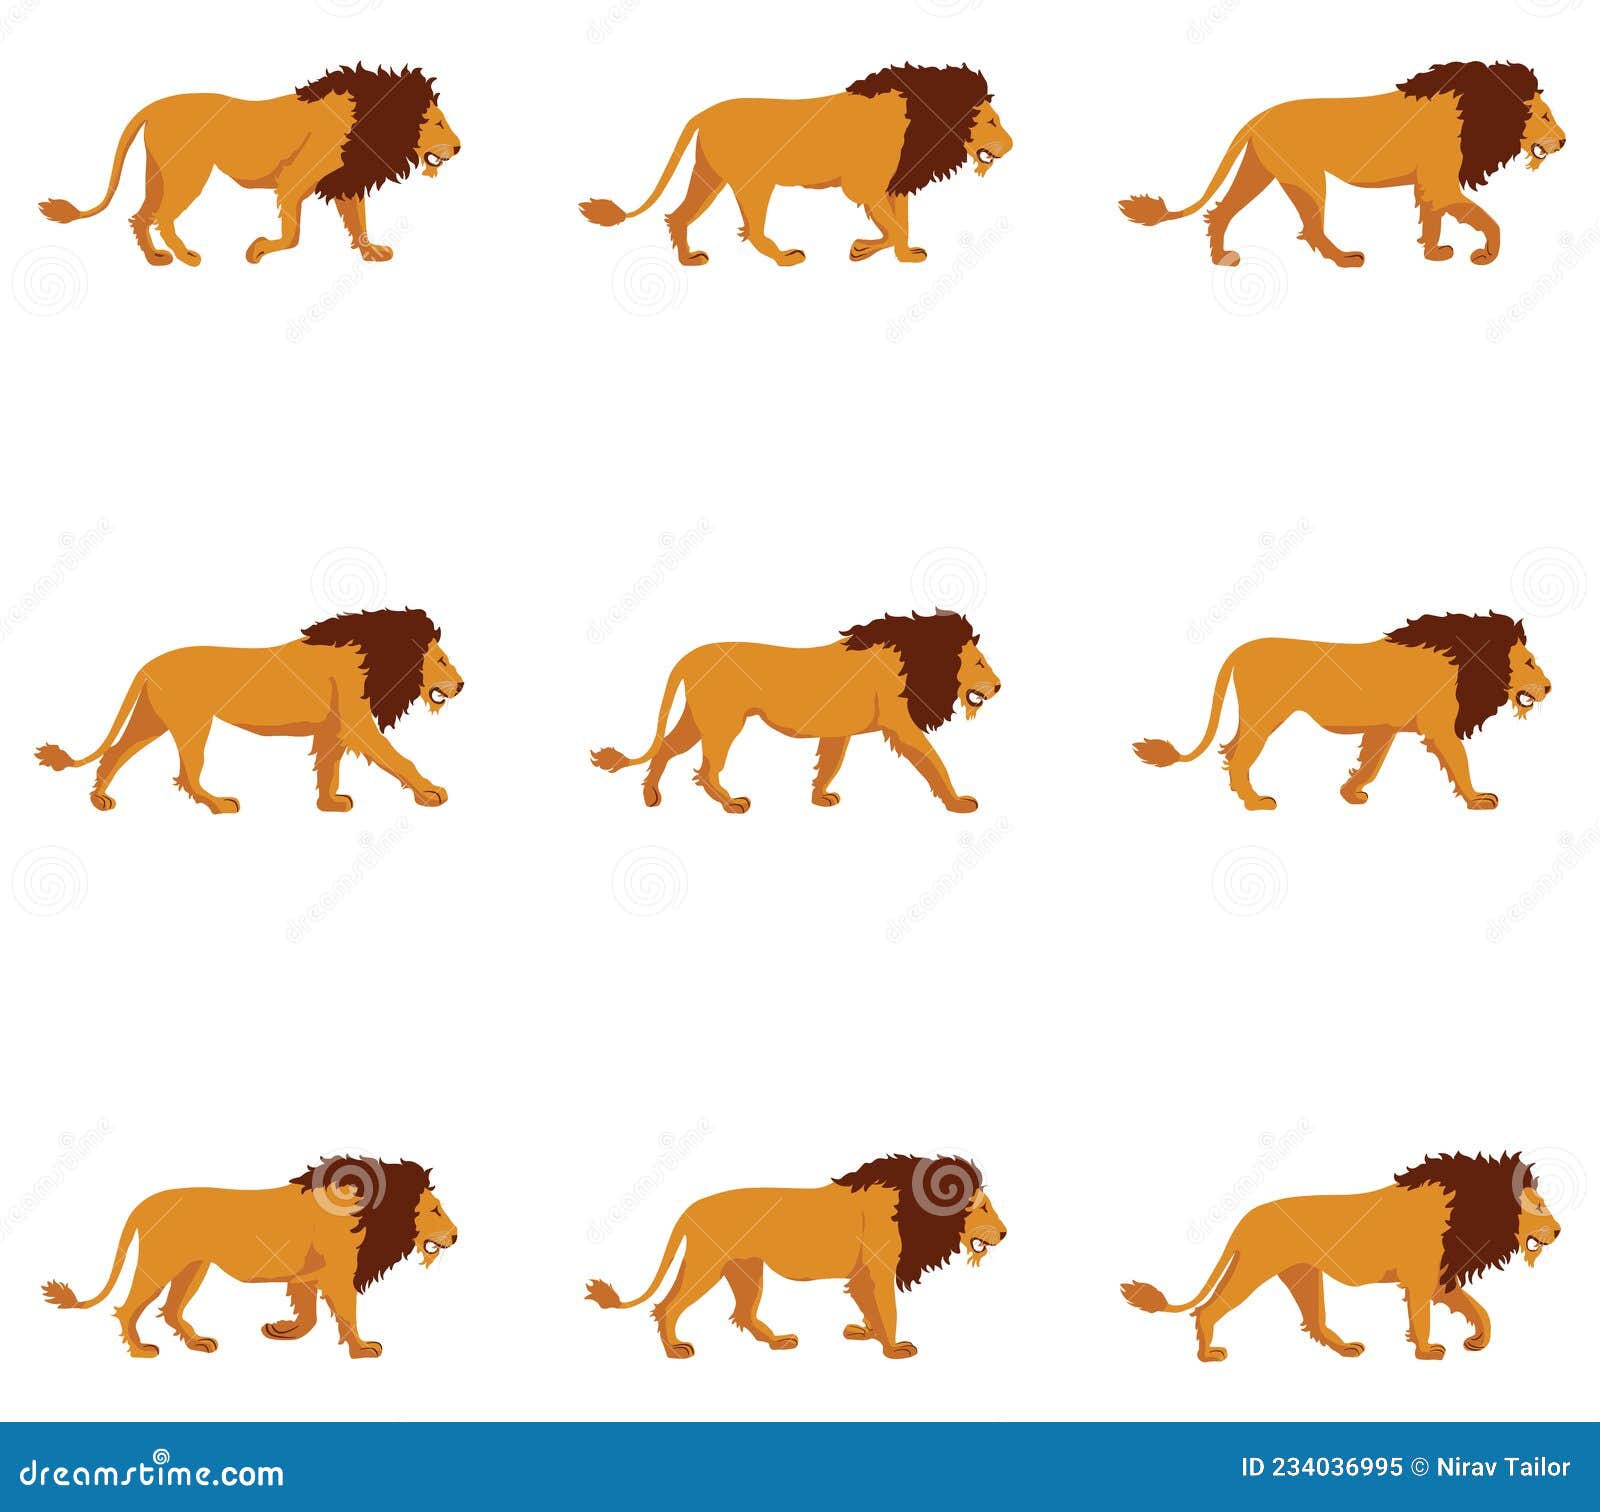 Lions Walk Cycle Animation Frame, Frame by Frame 2d Animation Stock  Illustration - Illustration of silhouette, lions: 234036995